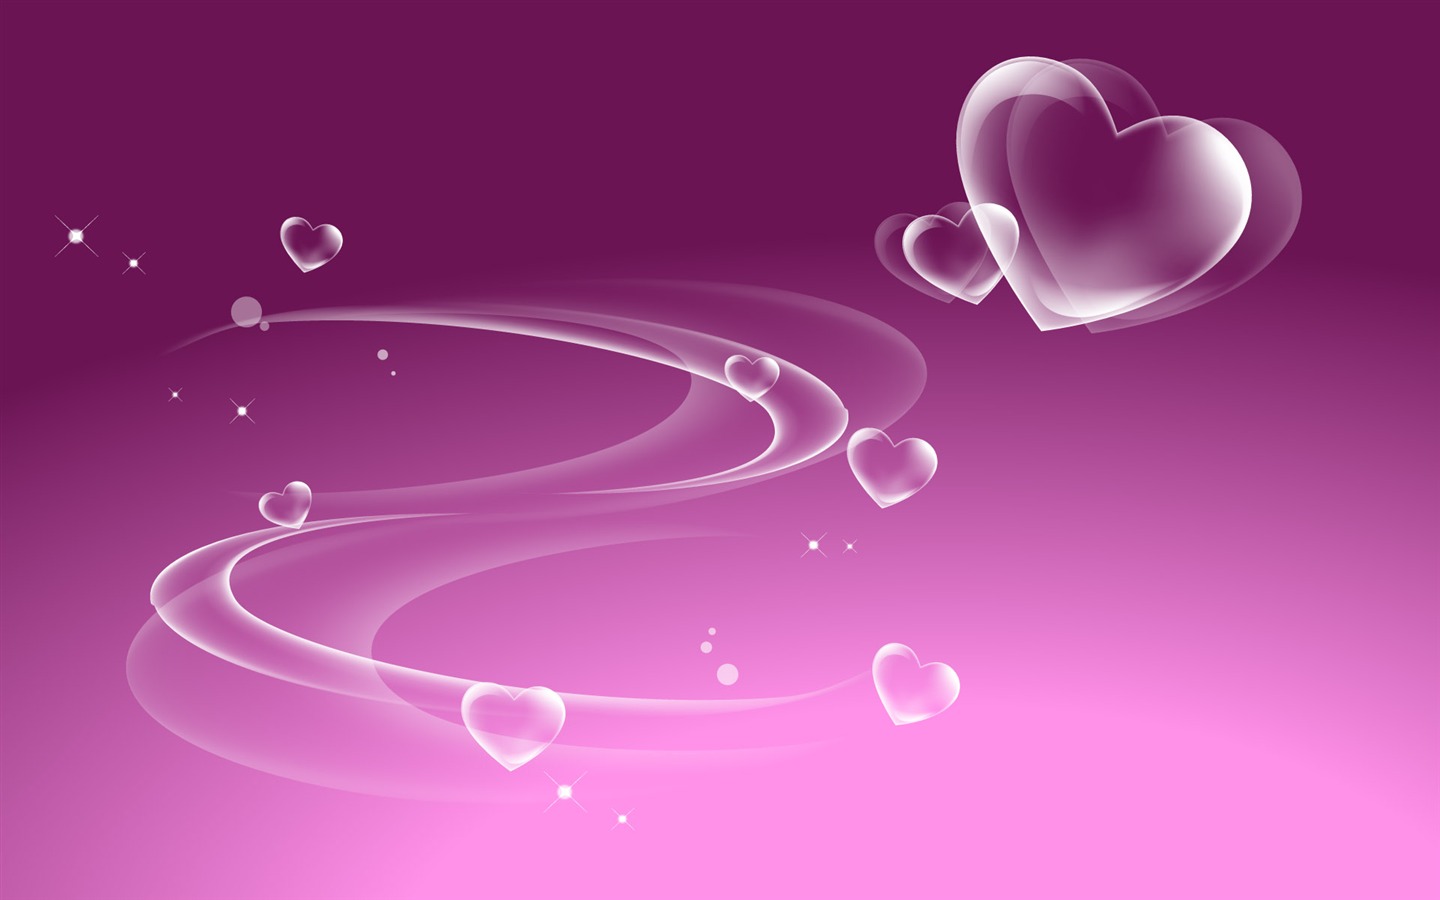 Valentine's Day Love Theme Wallpapers (2) #2 - 1440x900